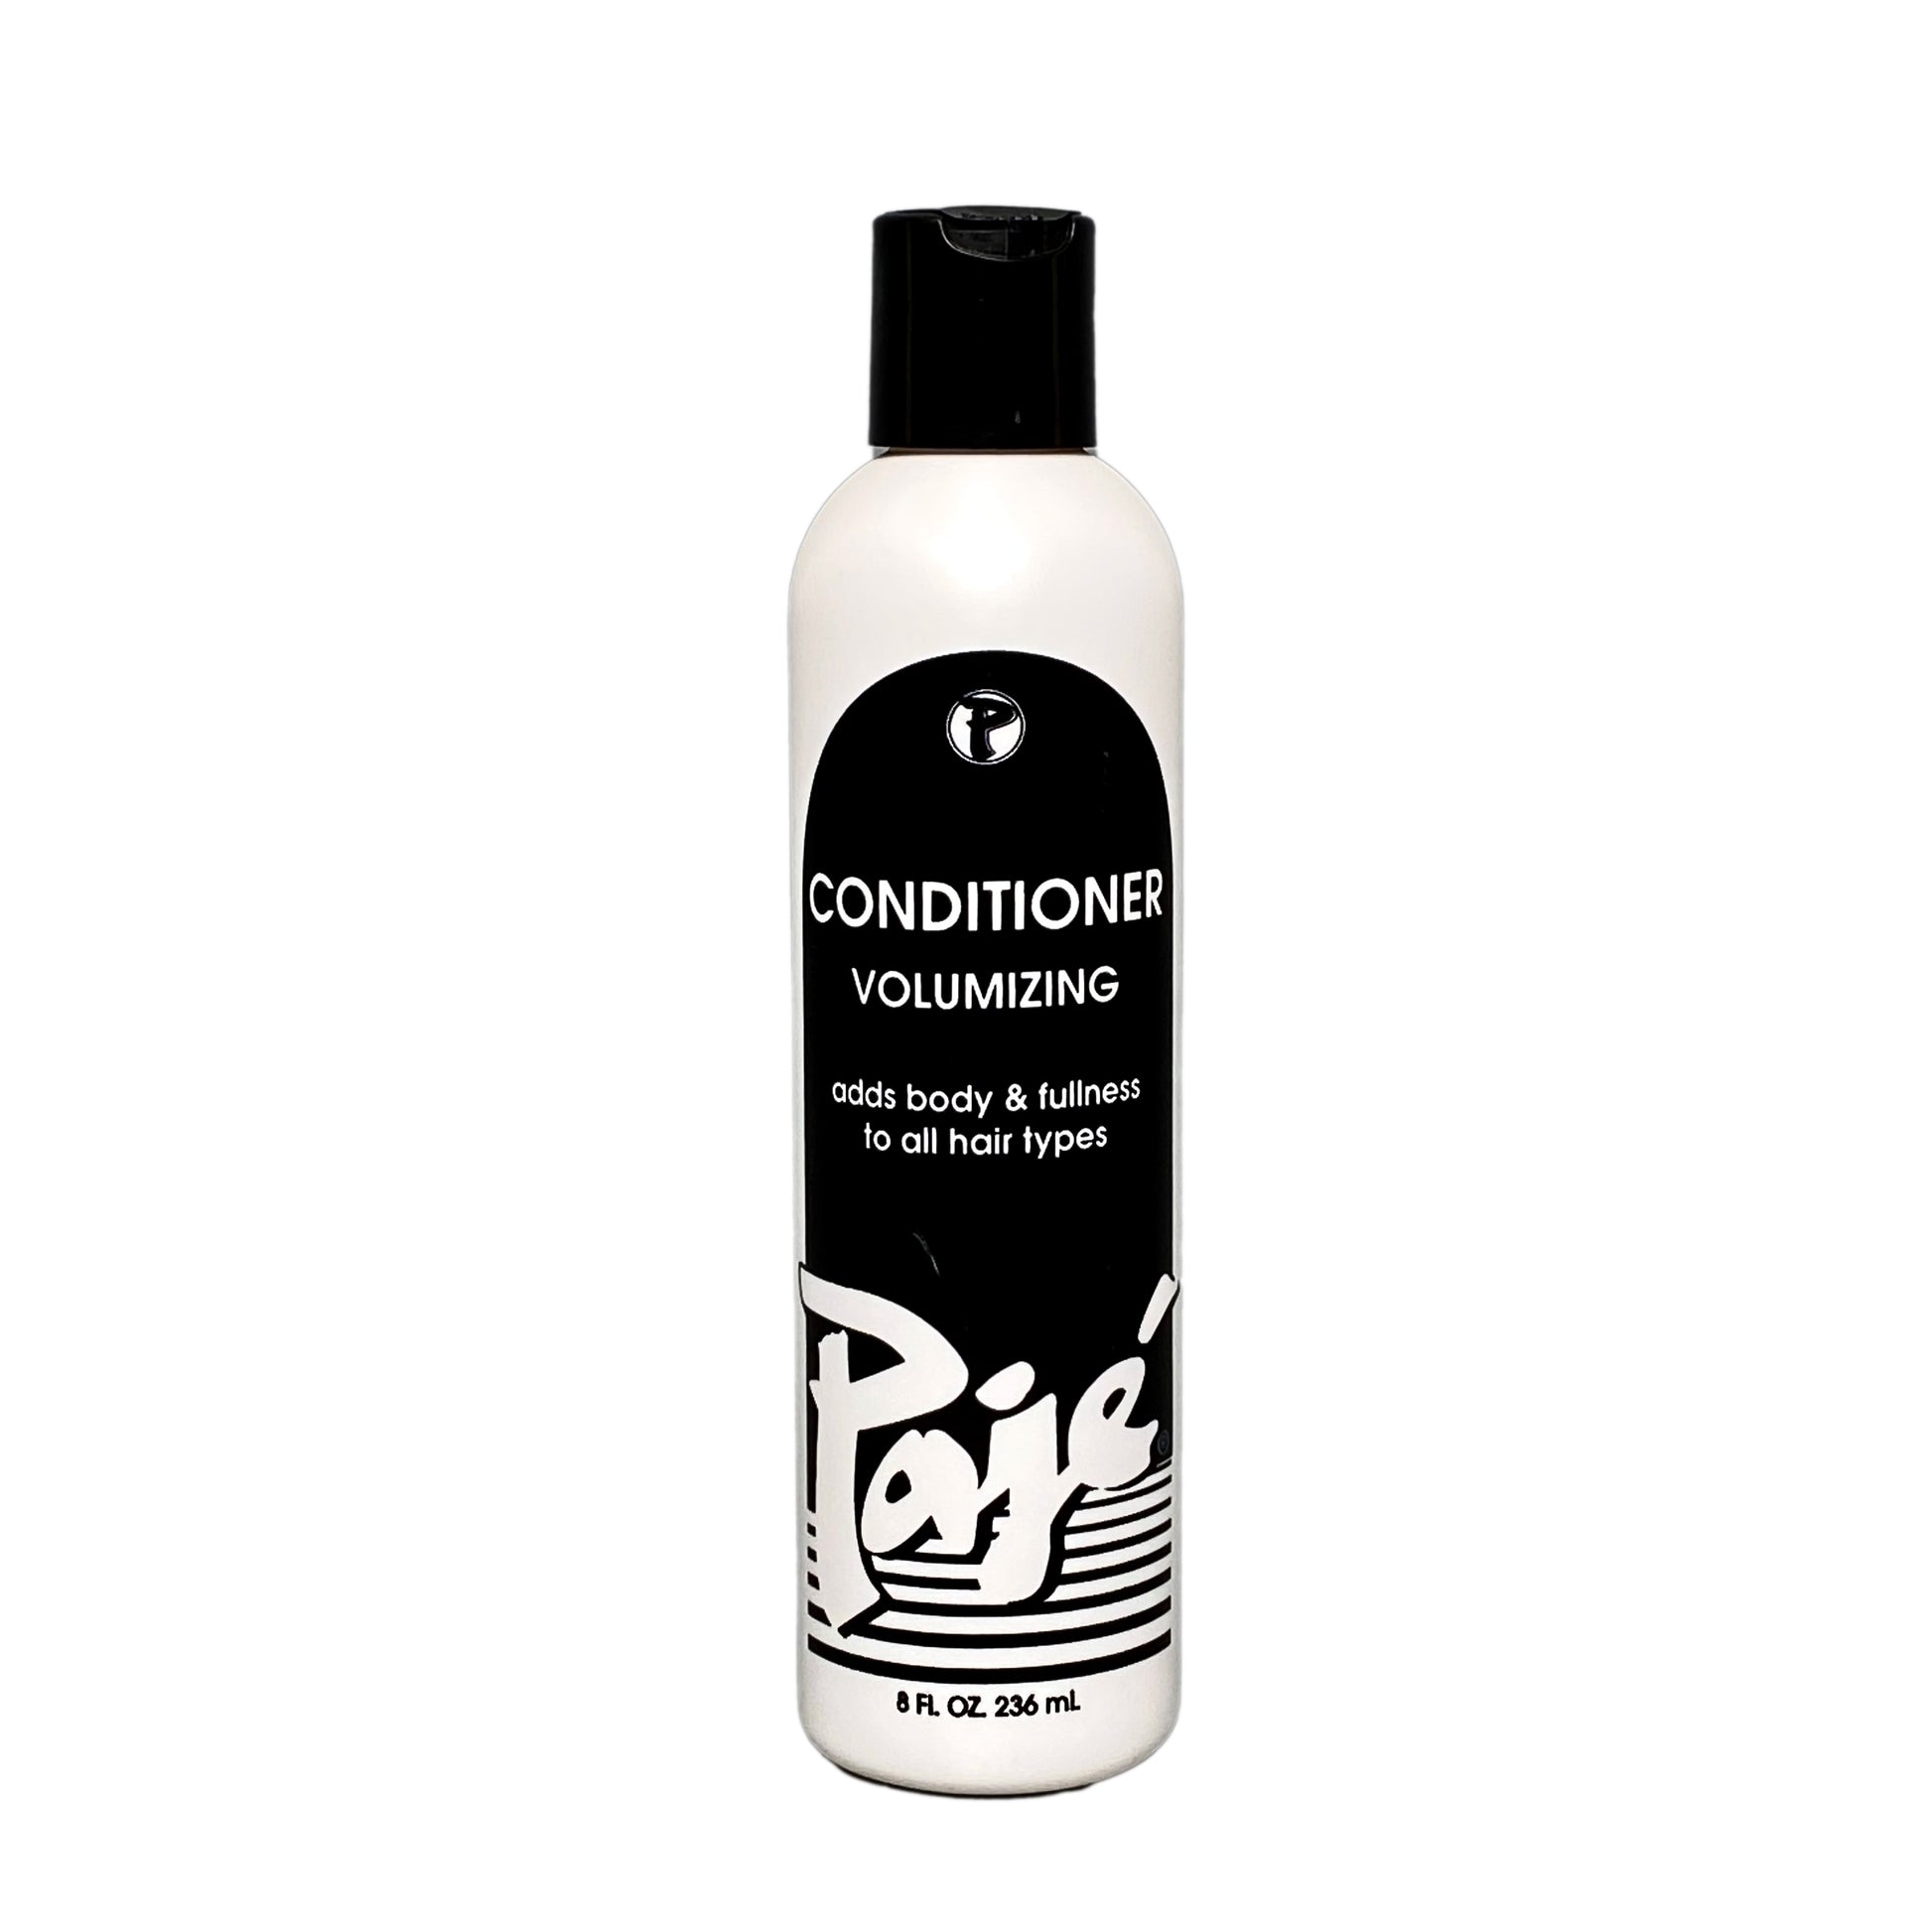 Pajé Volumizing Conditioner is specially formulated to infuse weightless volume and strengthen hair. Leaves hair nourished while maximizing volume and body—no sodium Laureth Sulfates (SLS) and Paraben free.